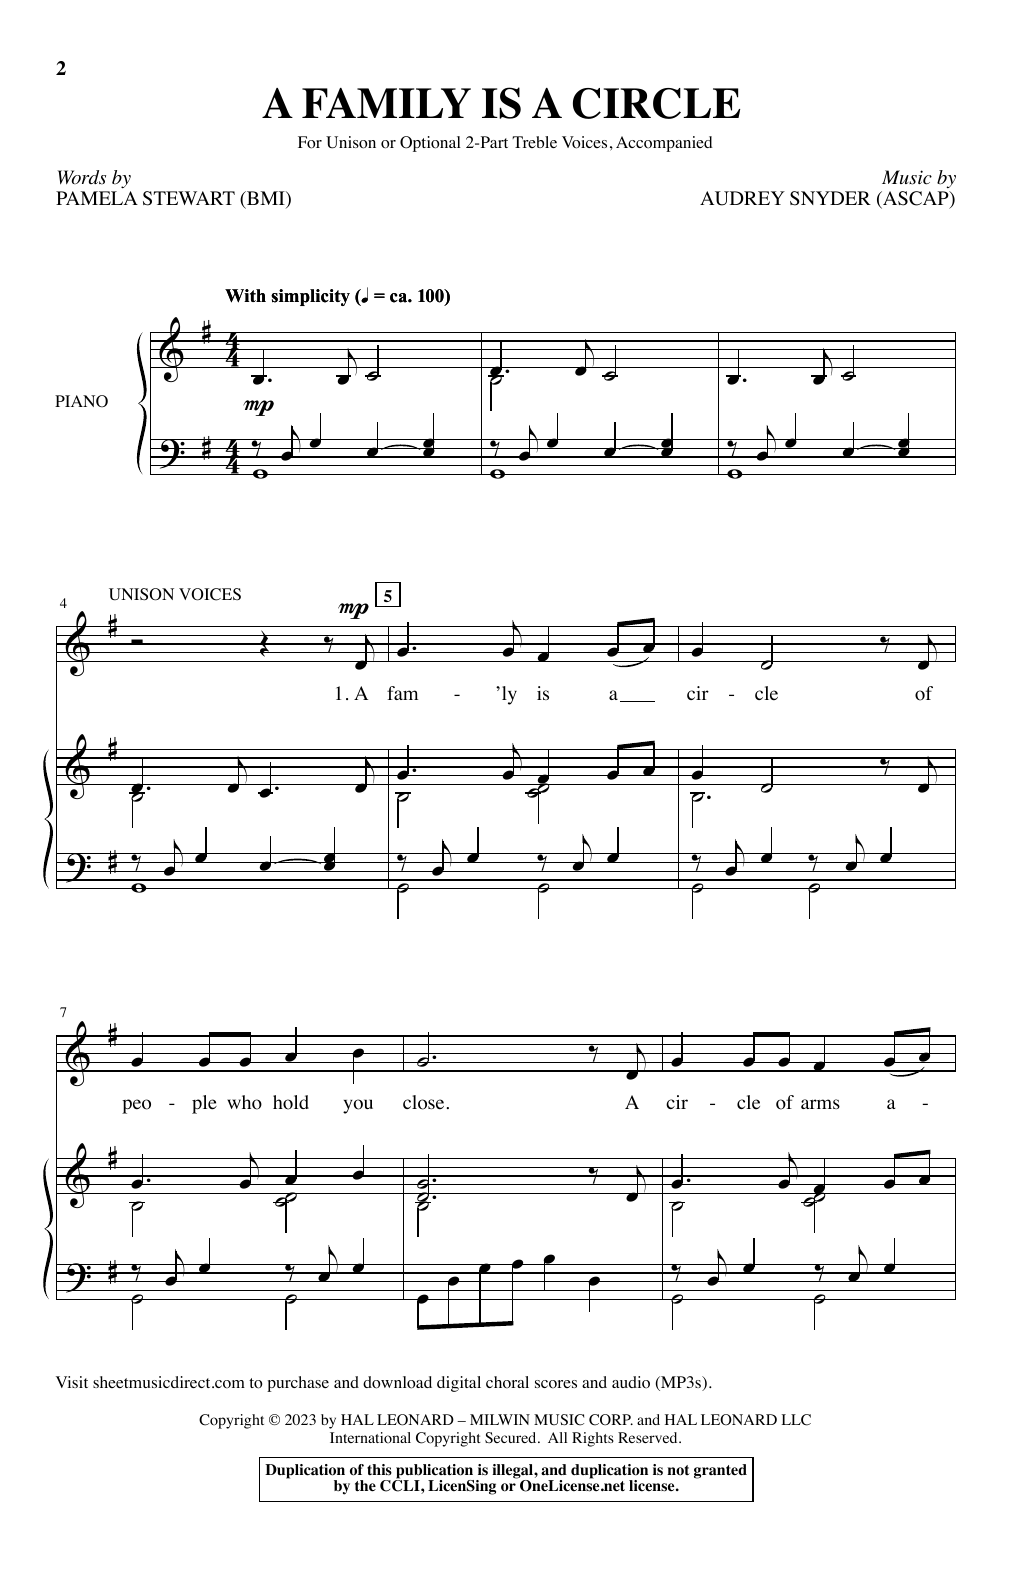 Download Pamela Stewart & Audrey Snyder A Family Is A Circle Sheet Music